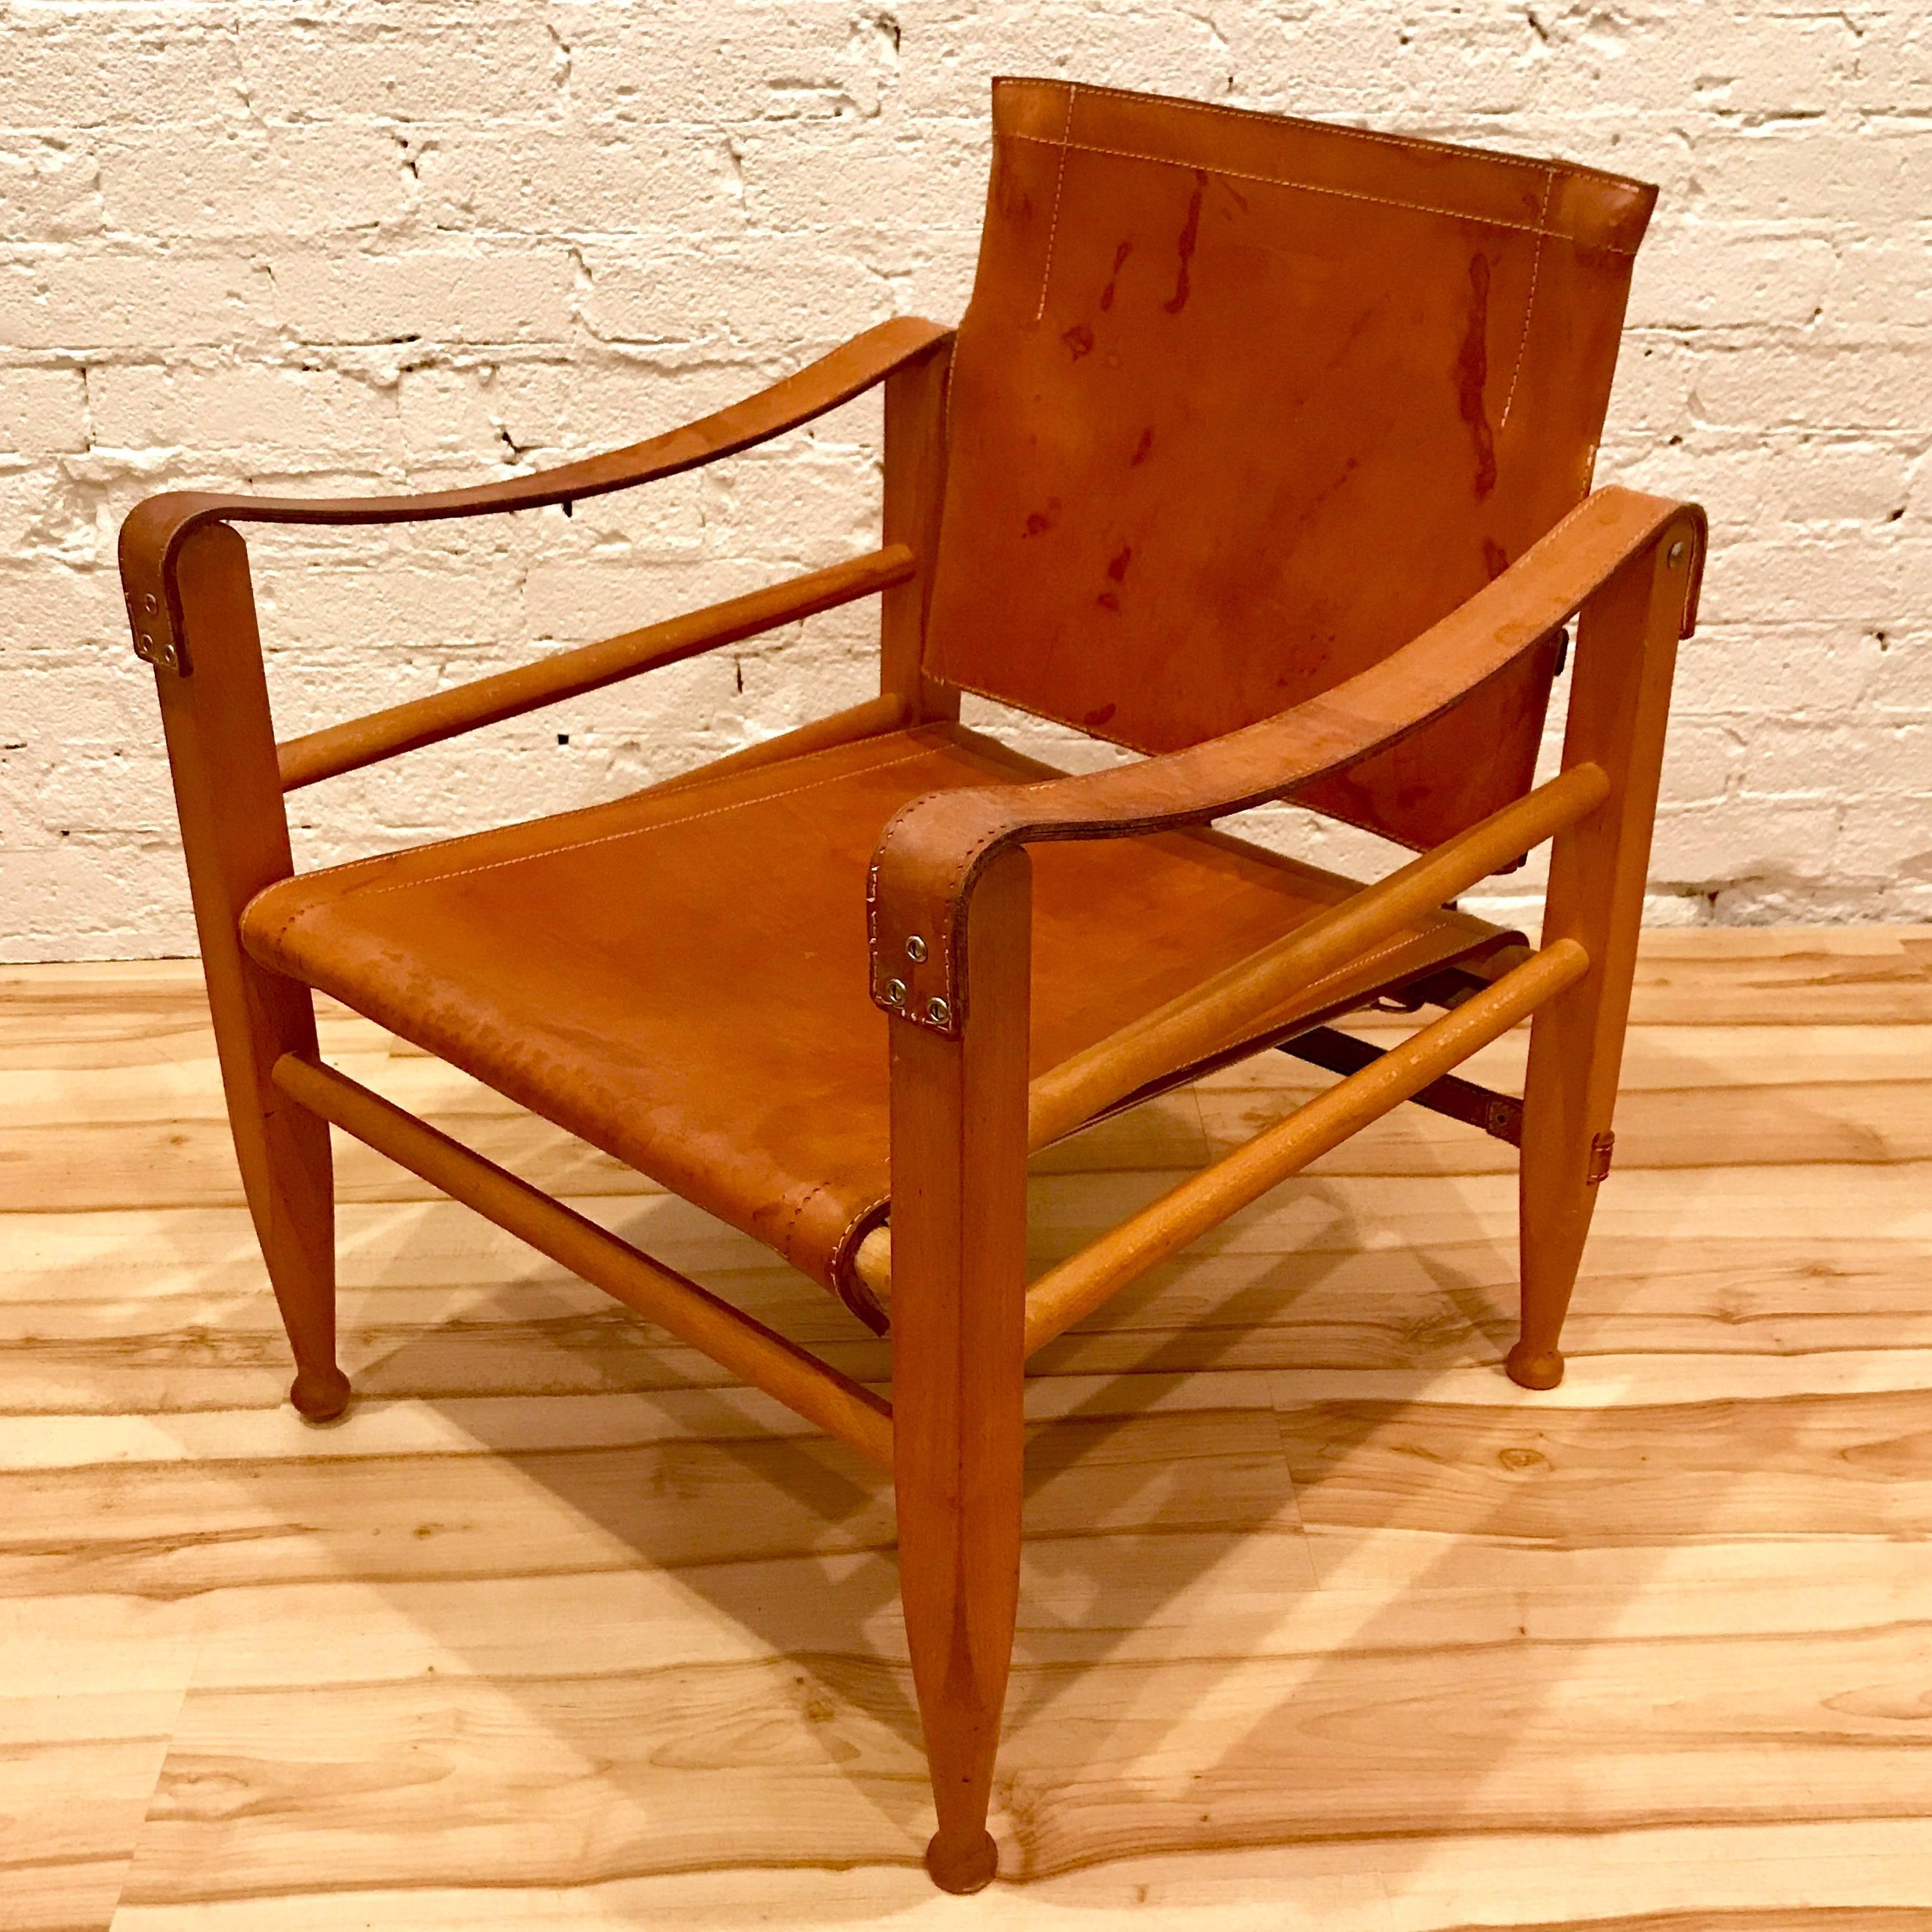 Pair of Danish modern wood and leather safari chairs in the style of Kaare Klint. Price is for the pair.